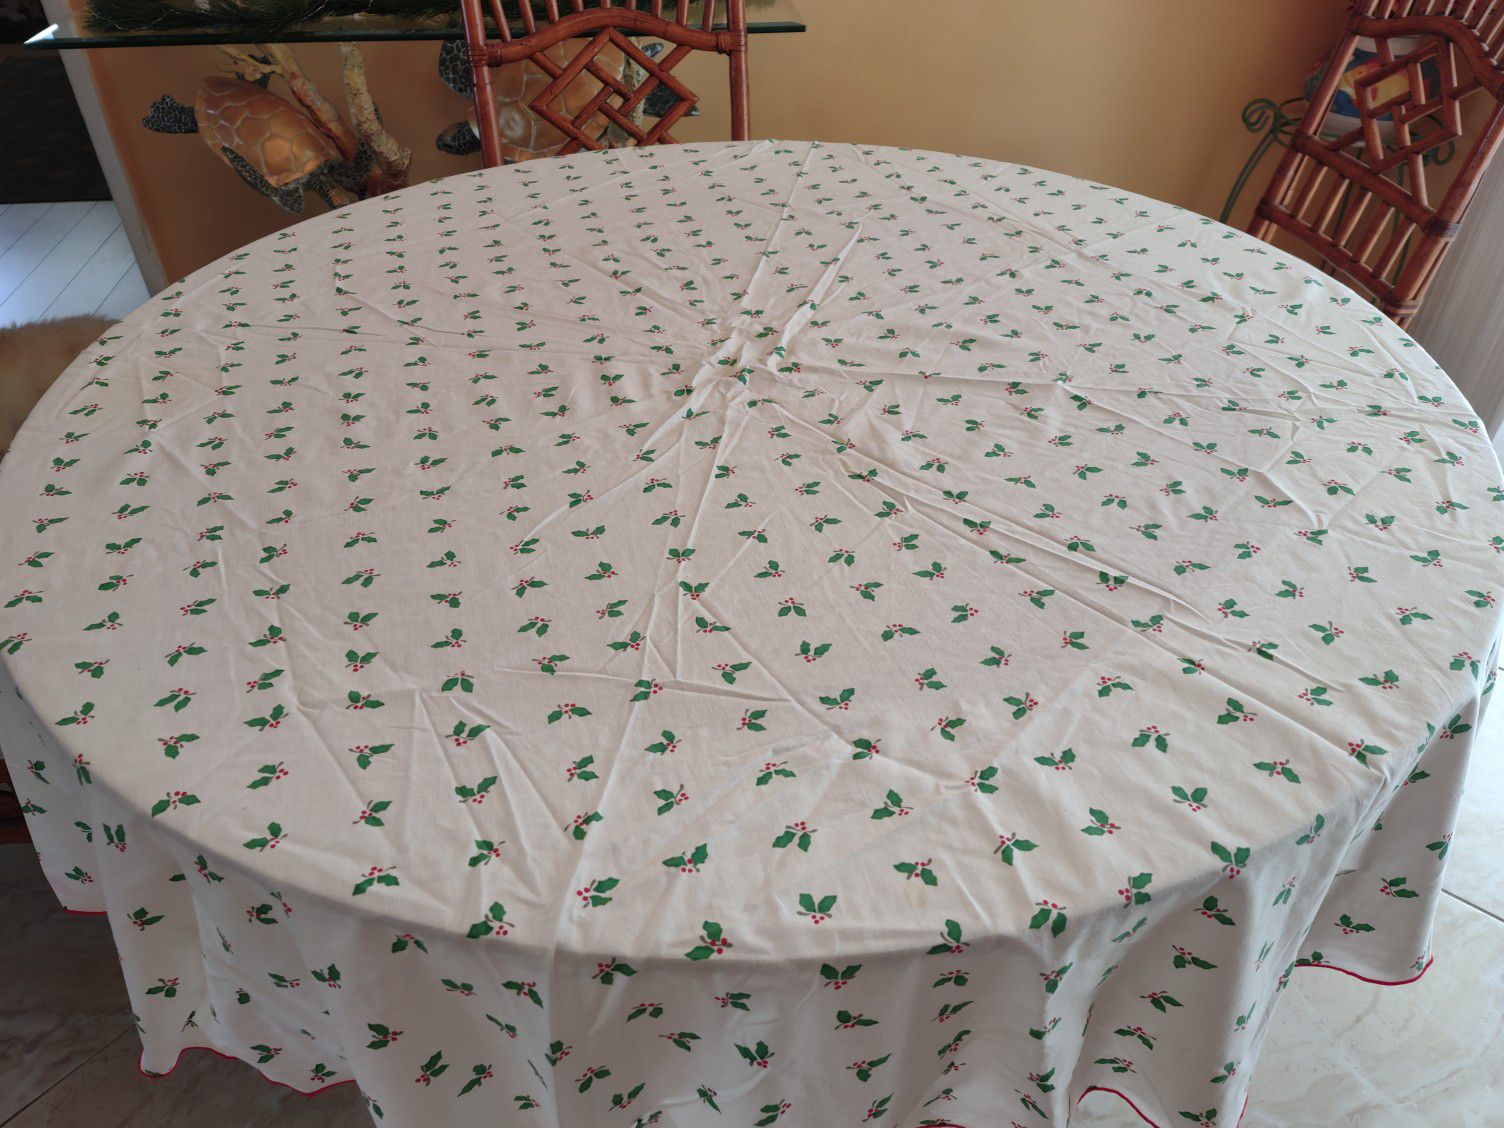 Christmas Tablecloth - 48-inch Round